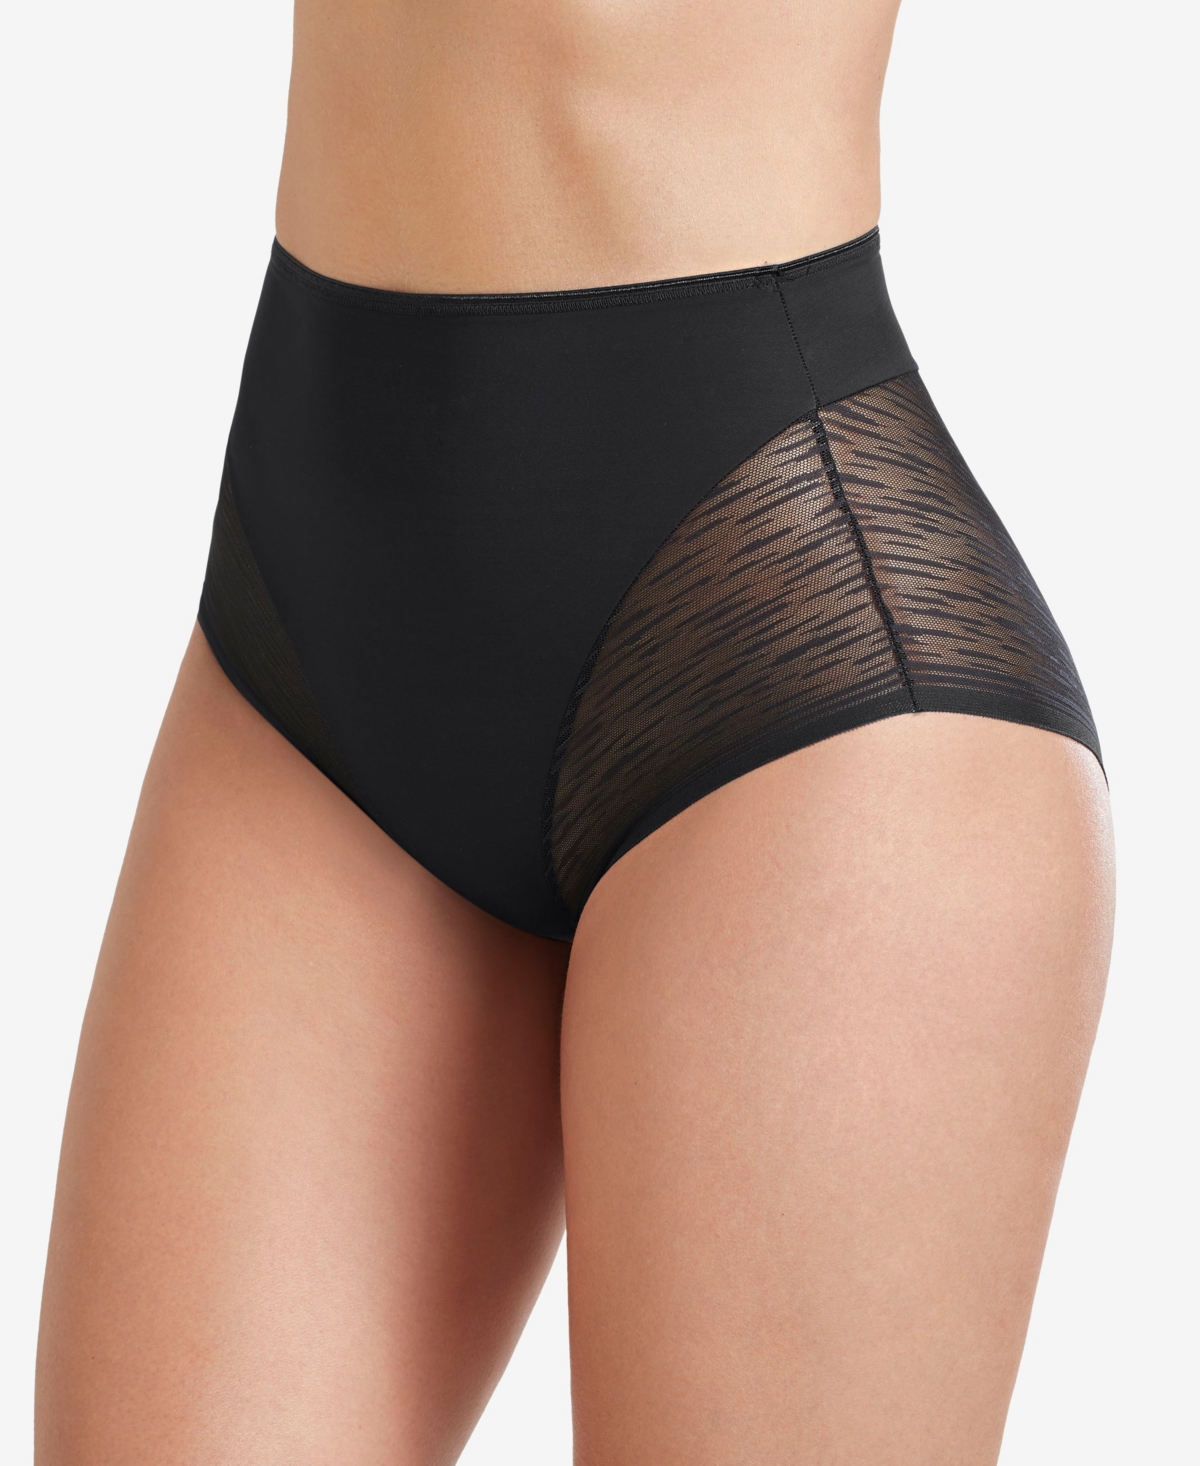 High Waisted Sheer Lace Shaper Panty - Dark Brown